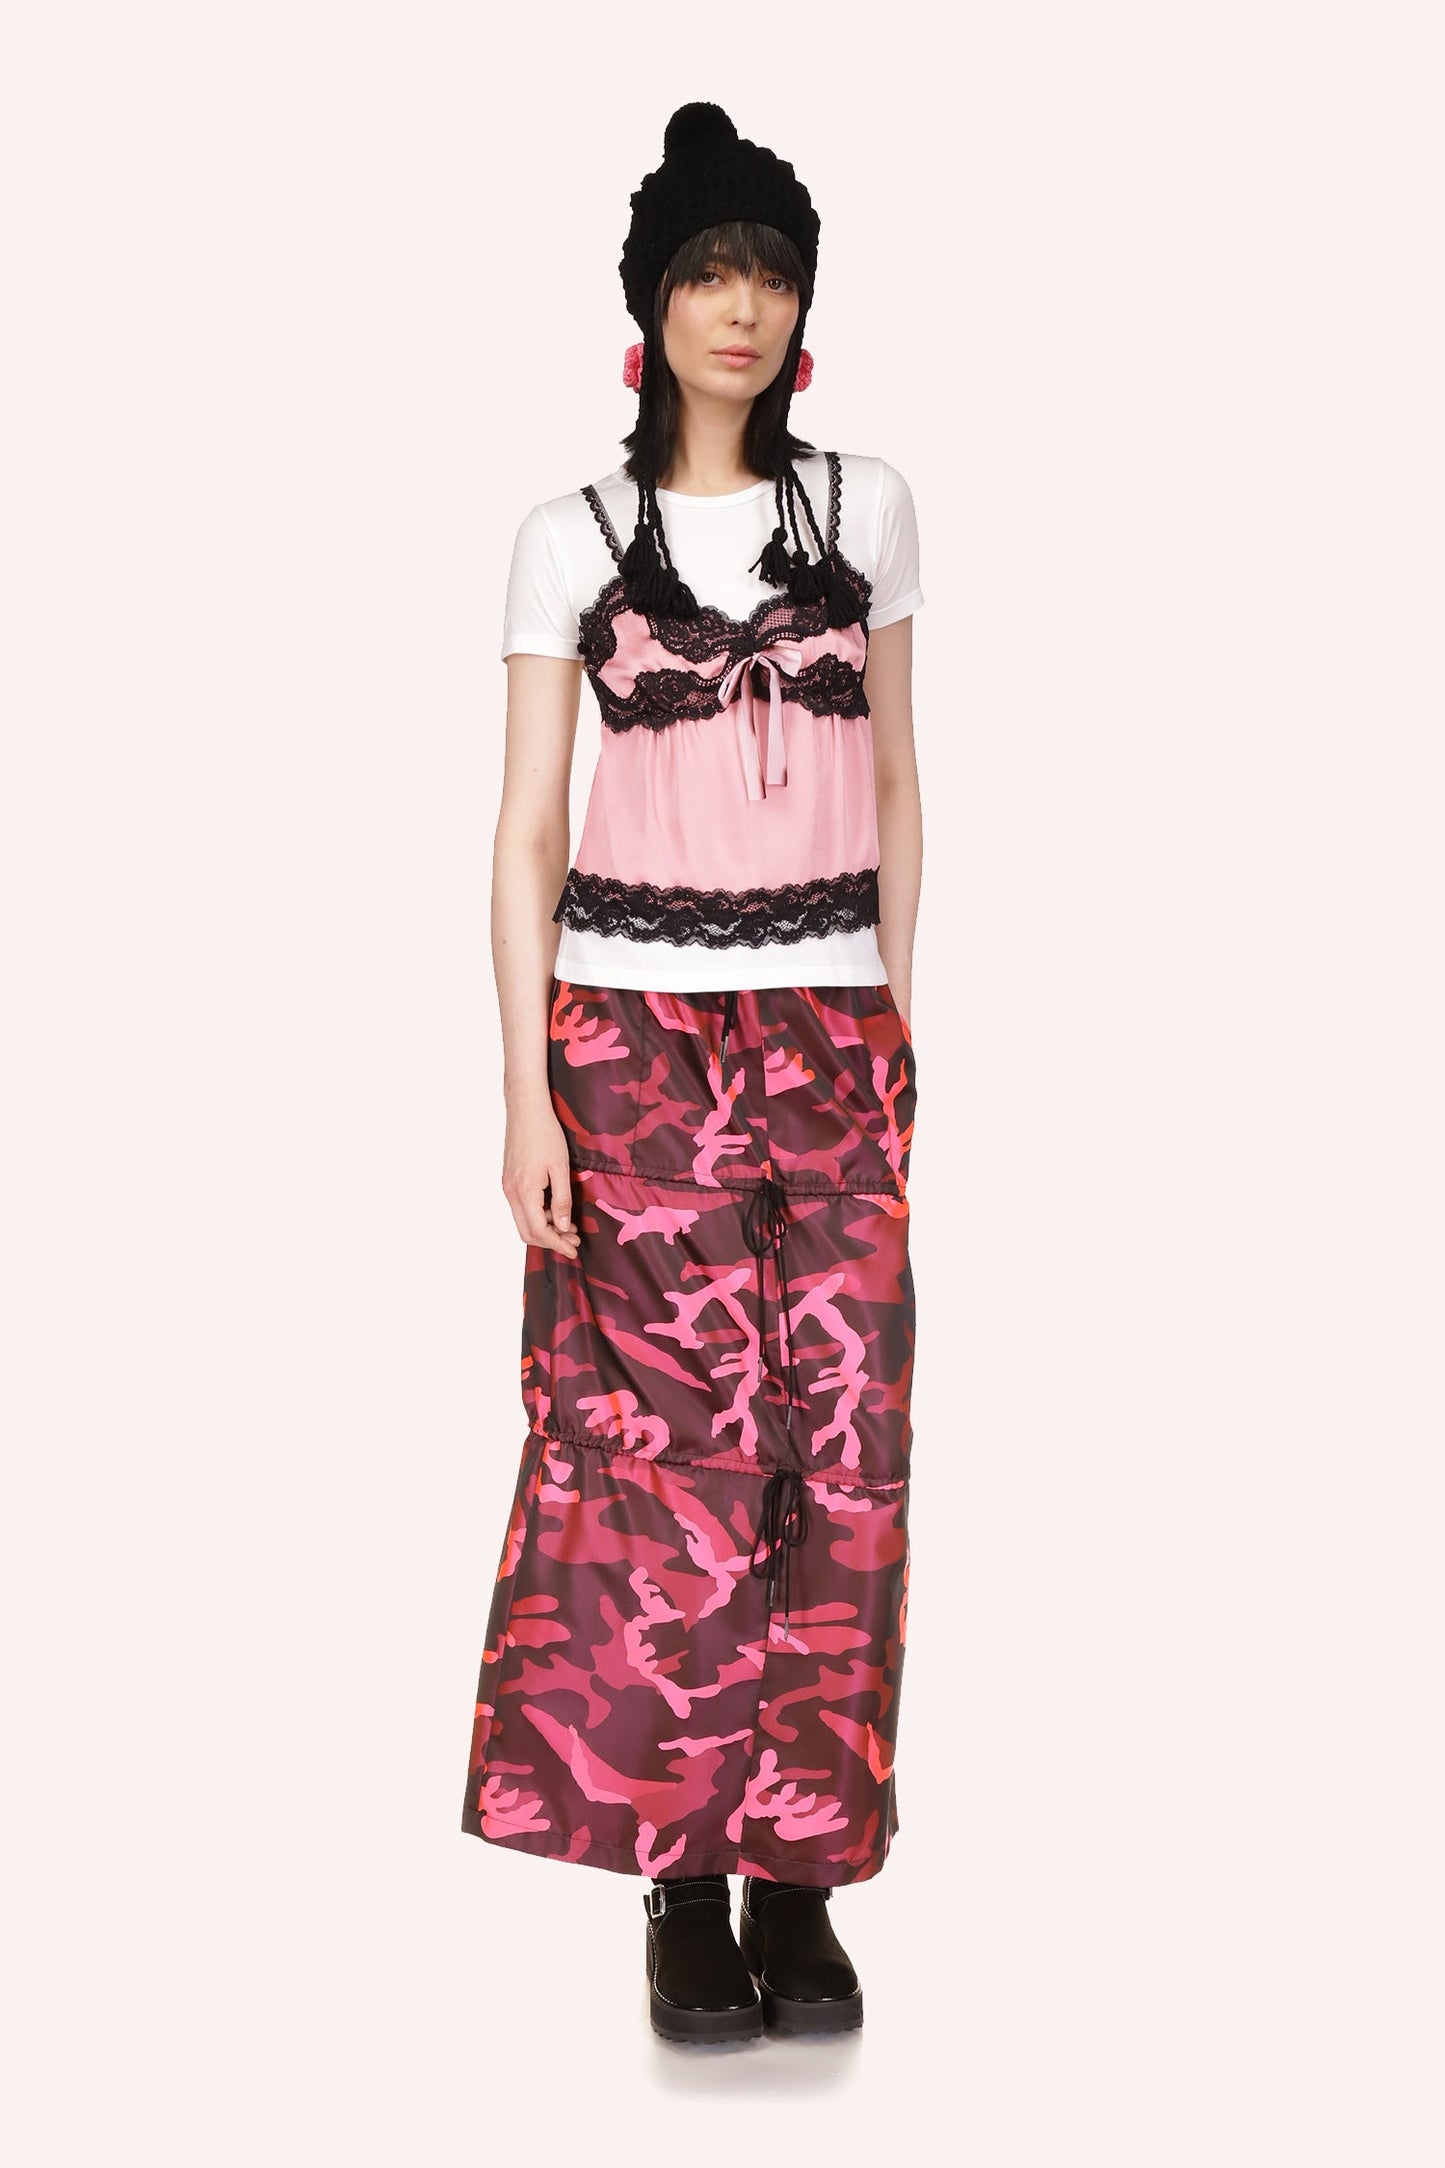 The Skirt Hot Pink Multi, is a camouflage-style pattern with varying shades of dark pink